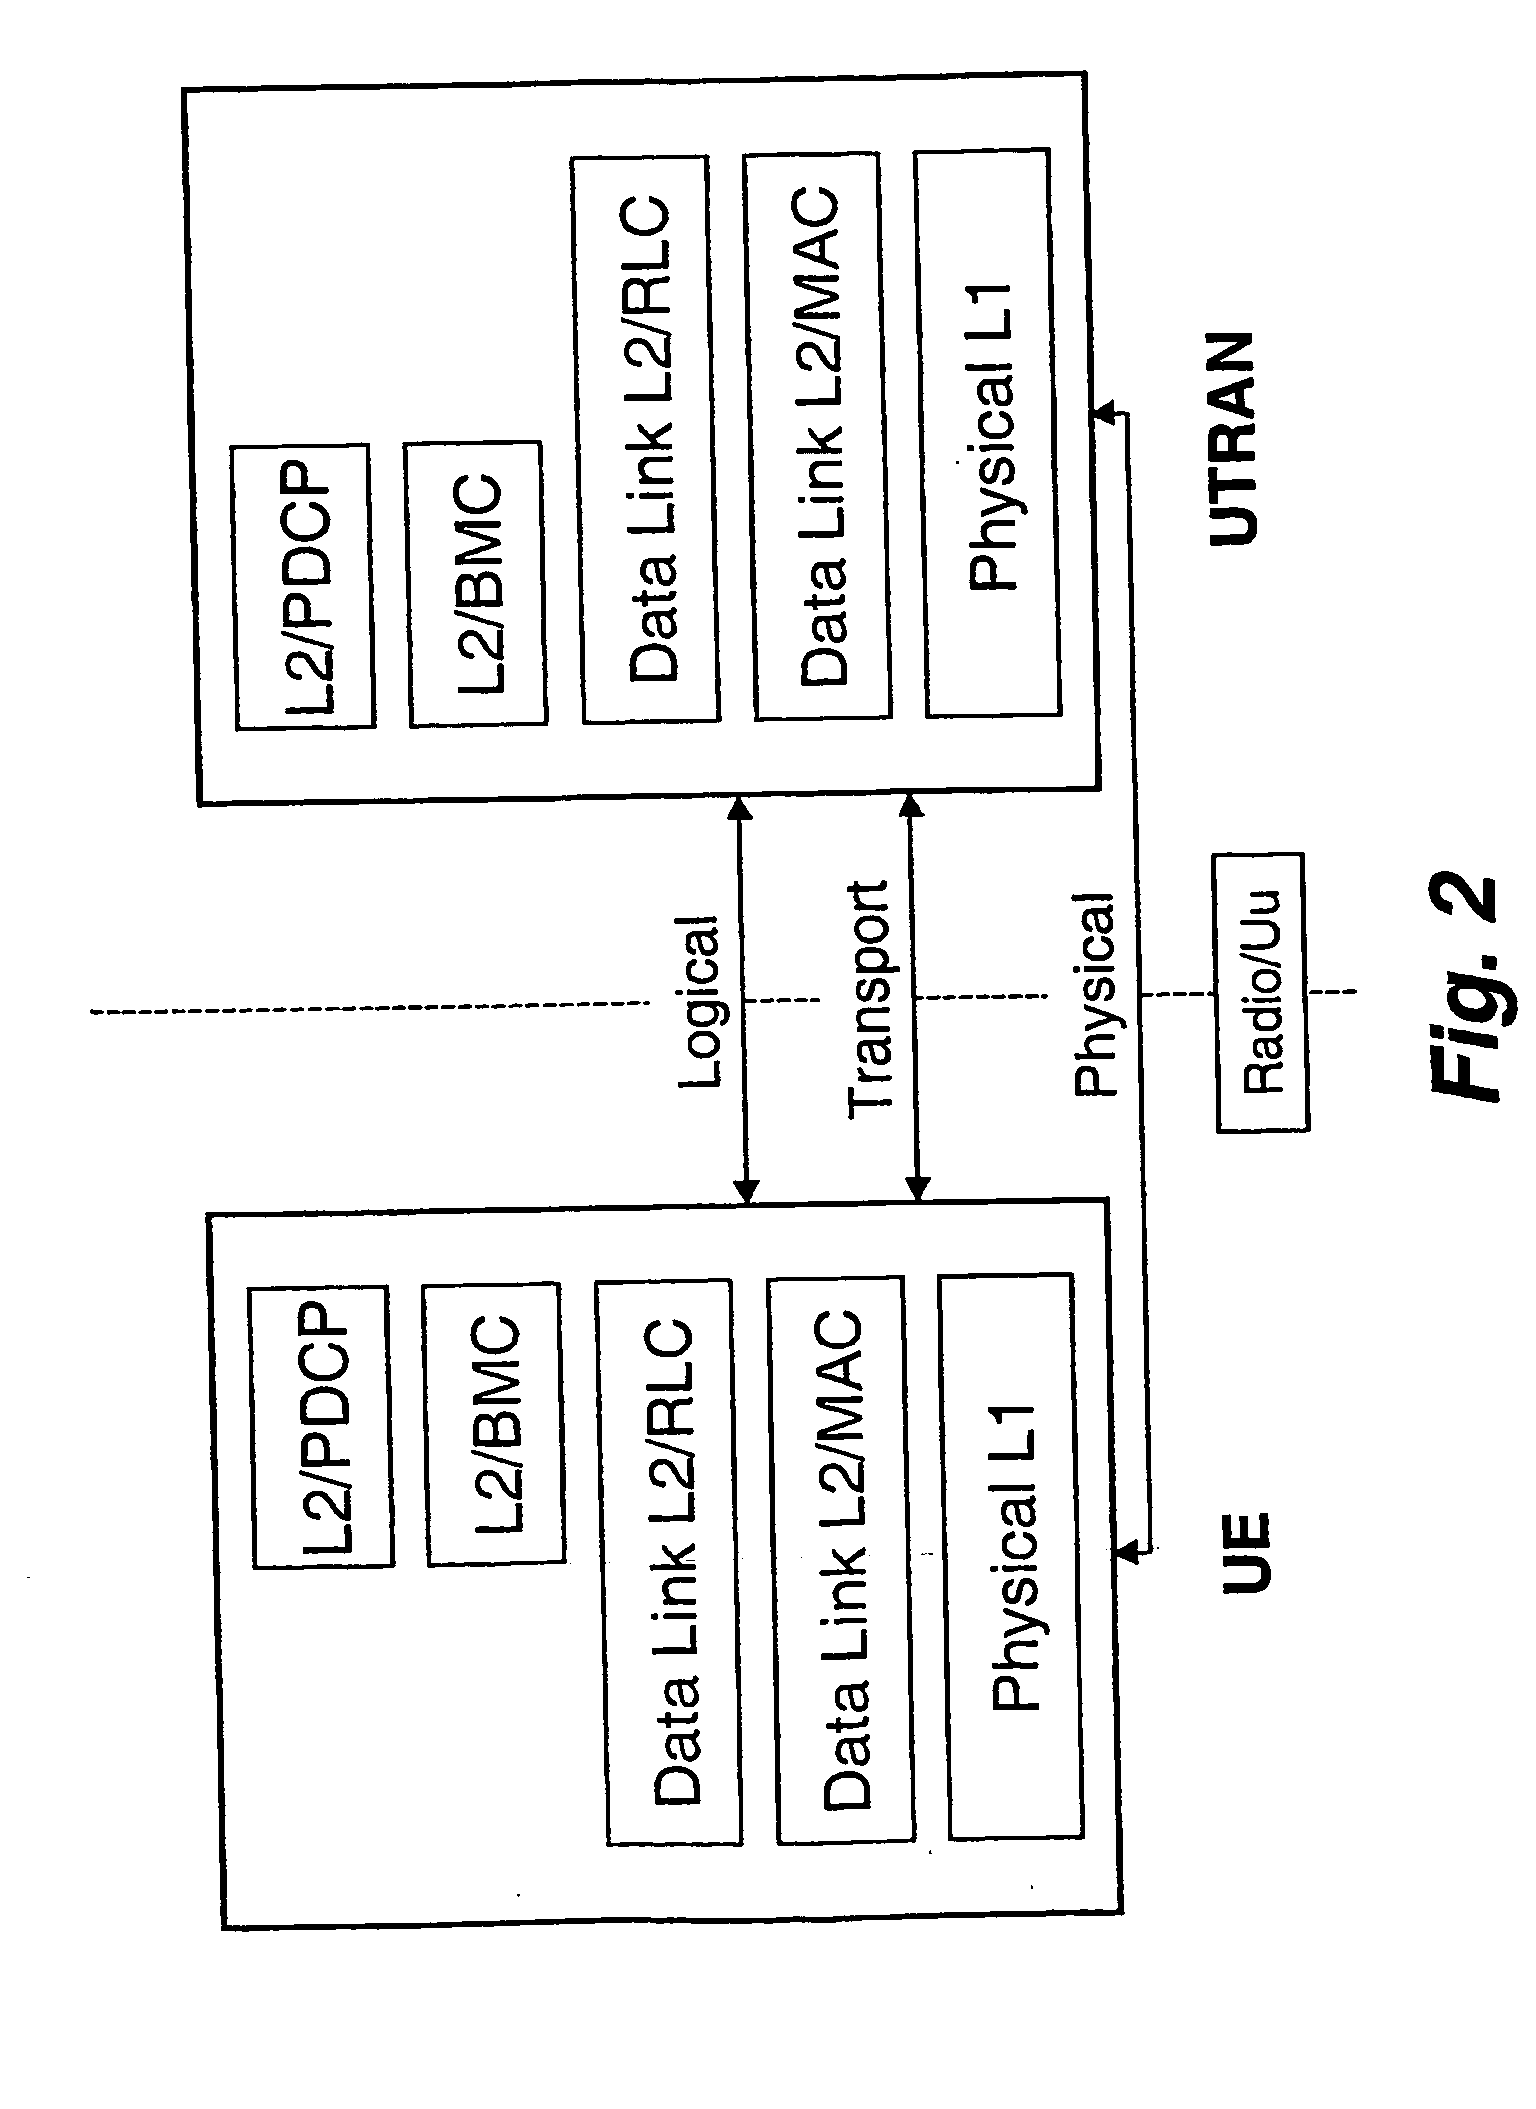 Method and system of load control